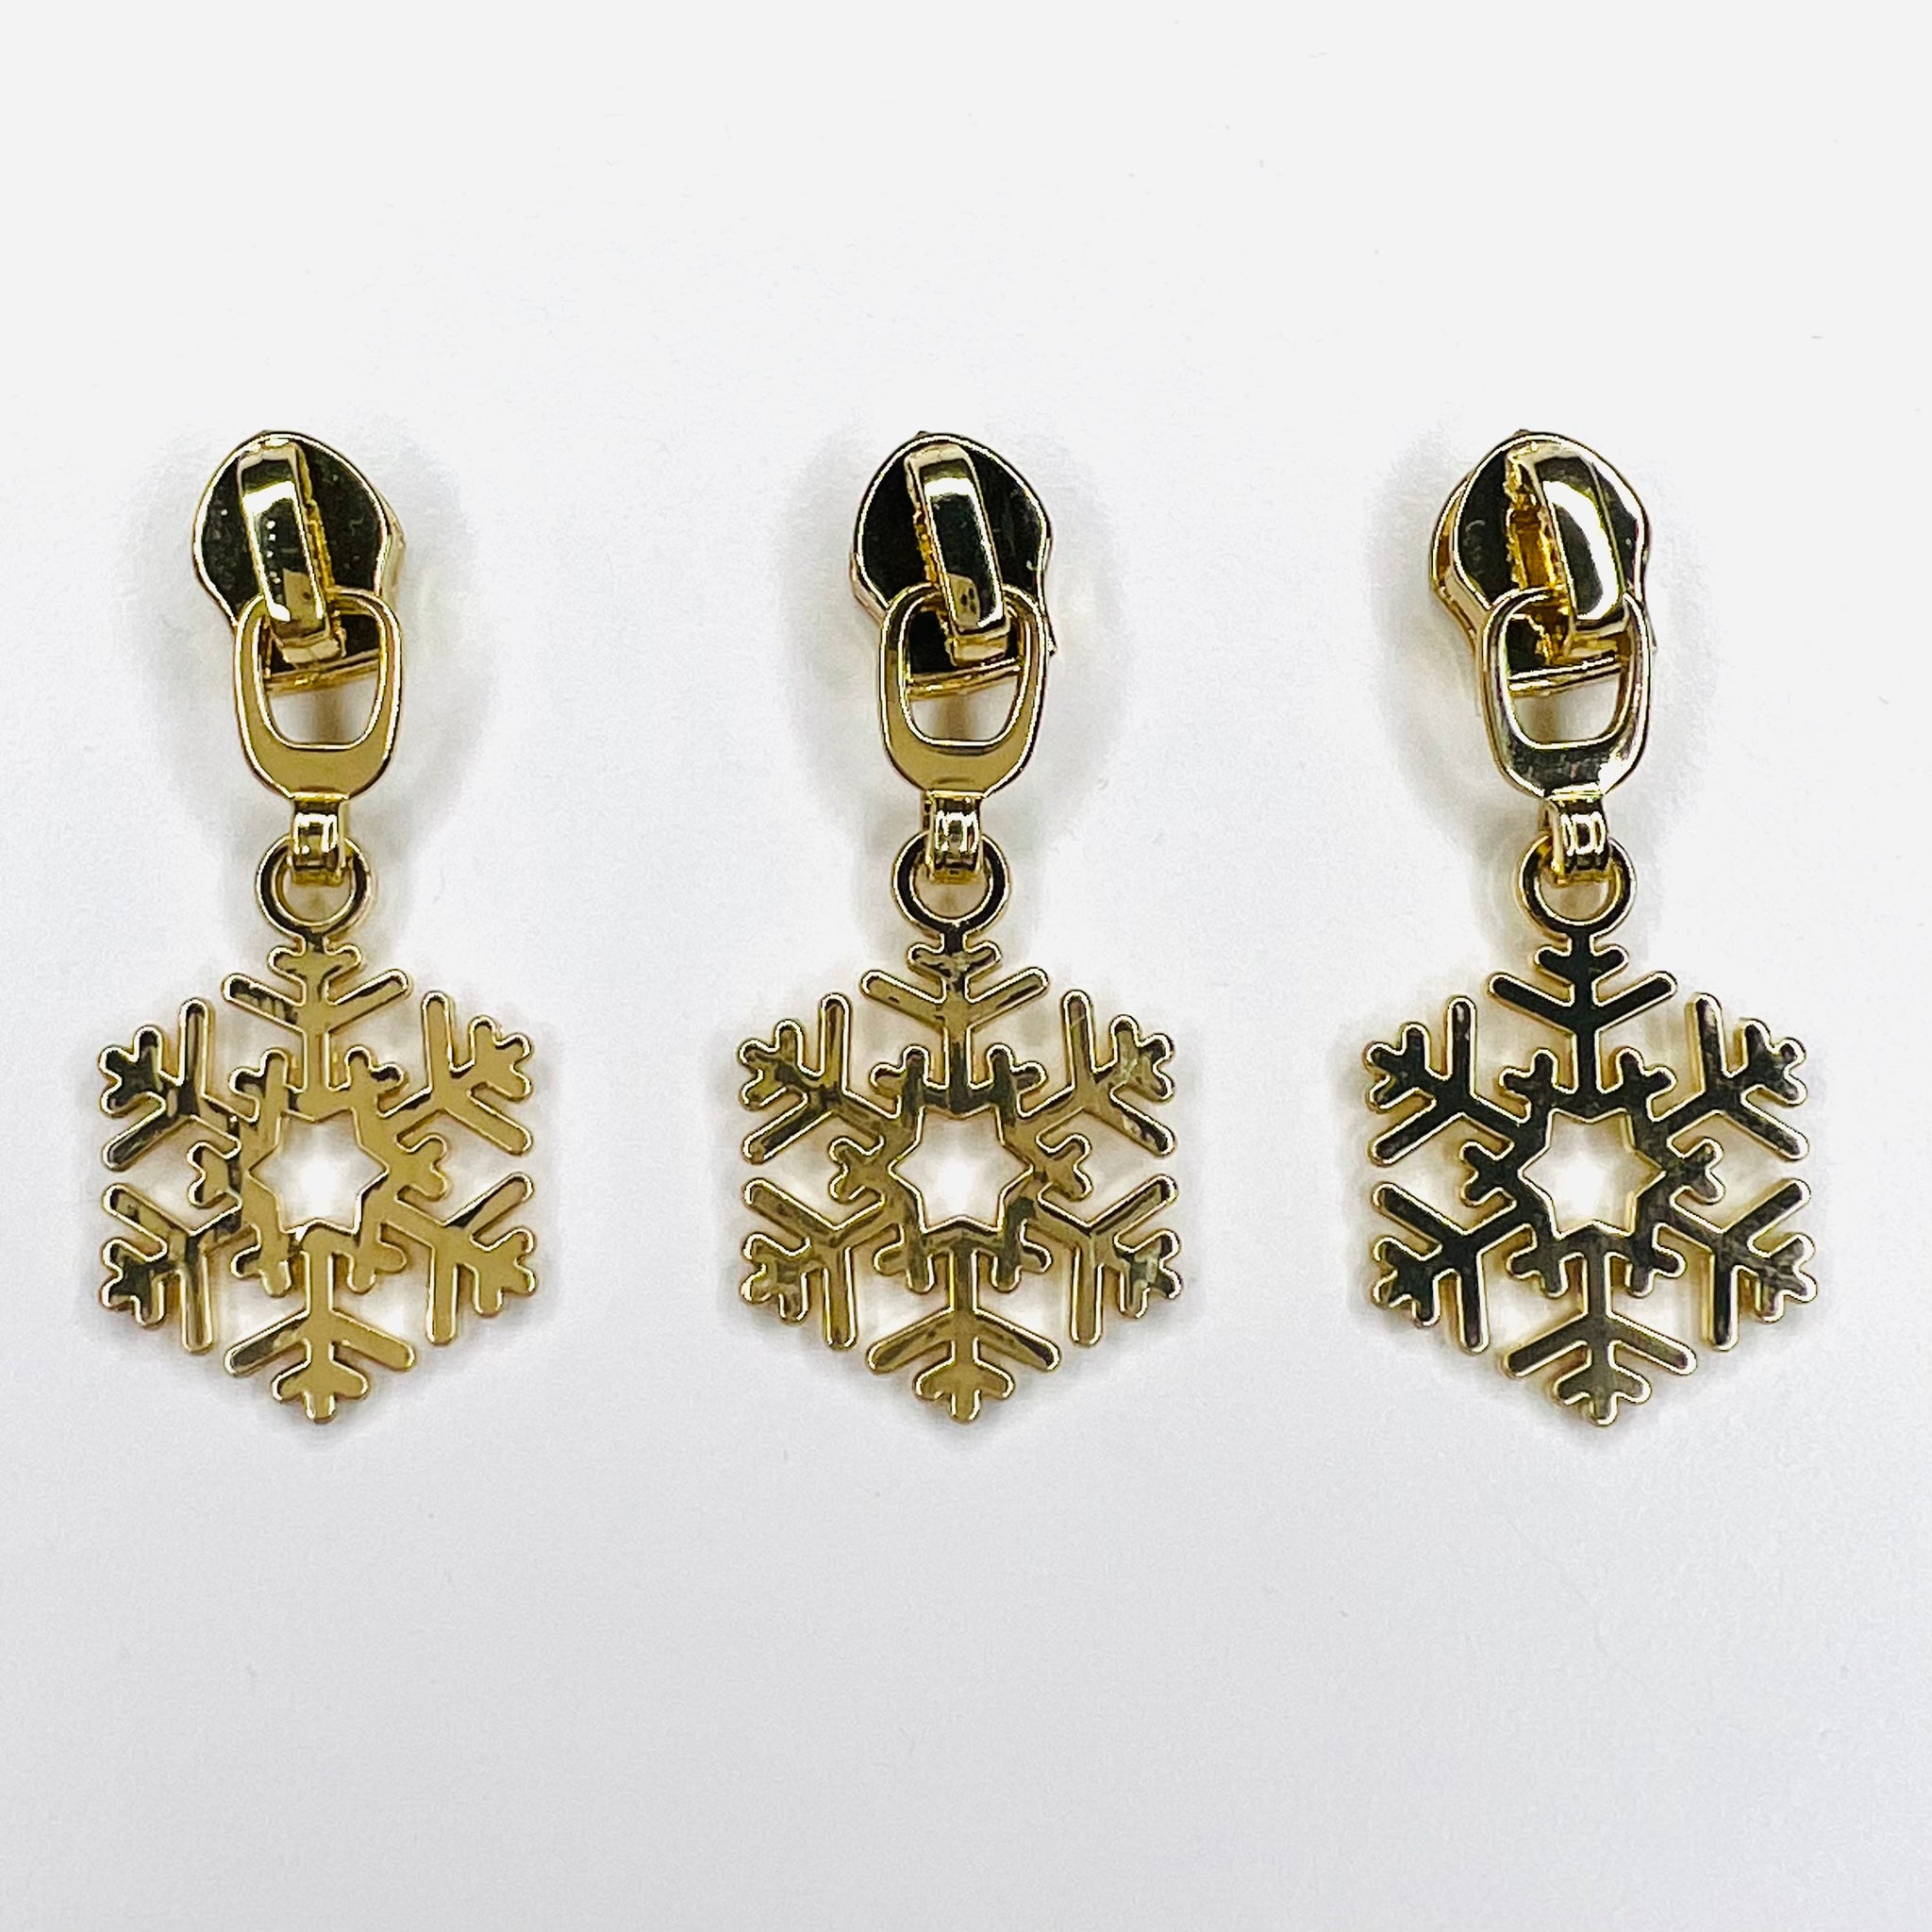 Zipper Pull - Snowflake (Selection Of Colours)